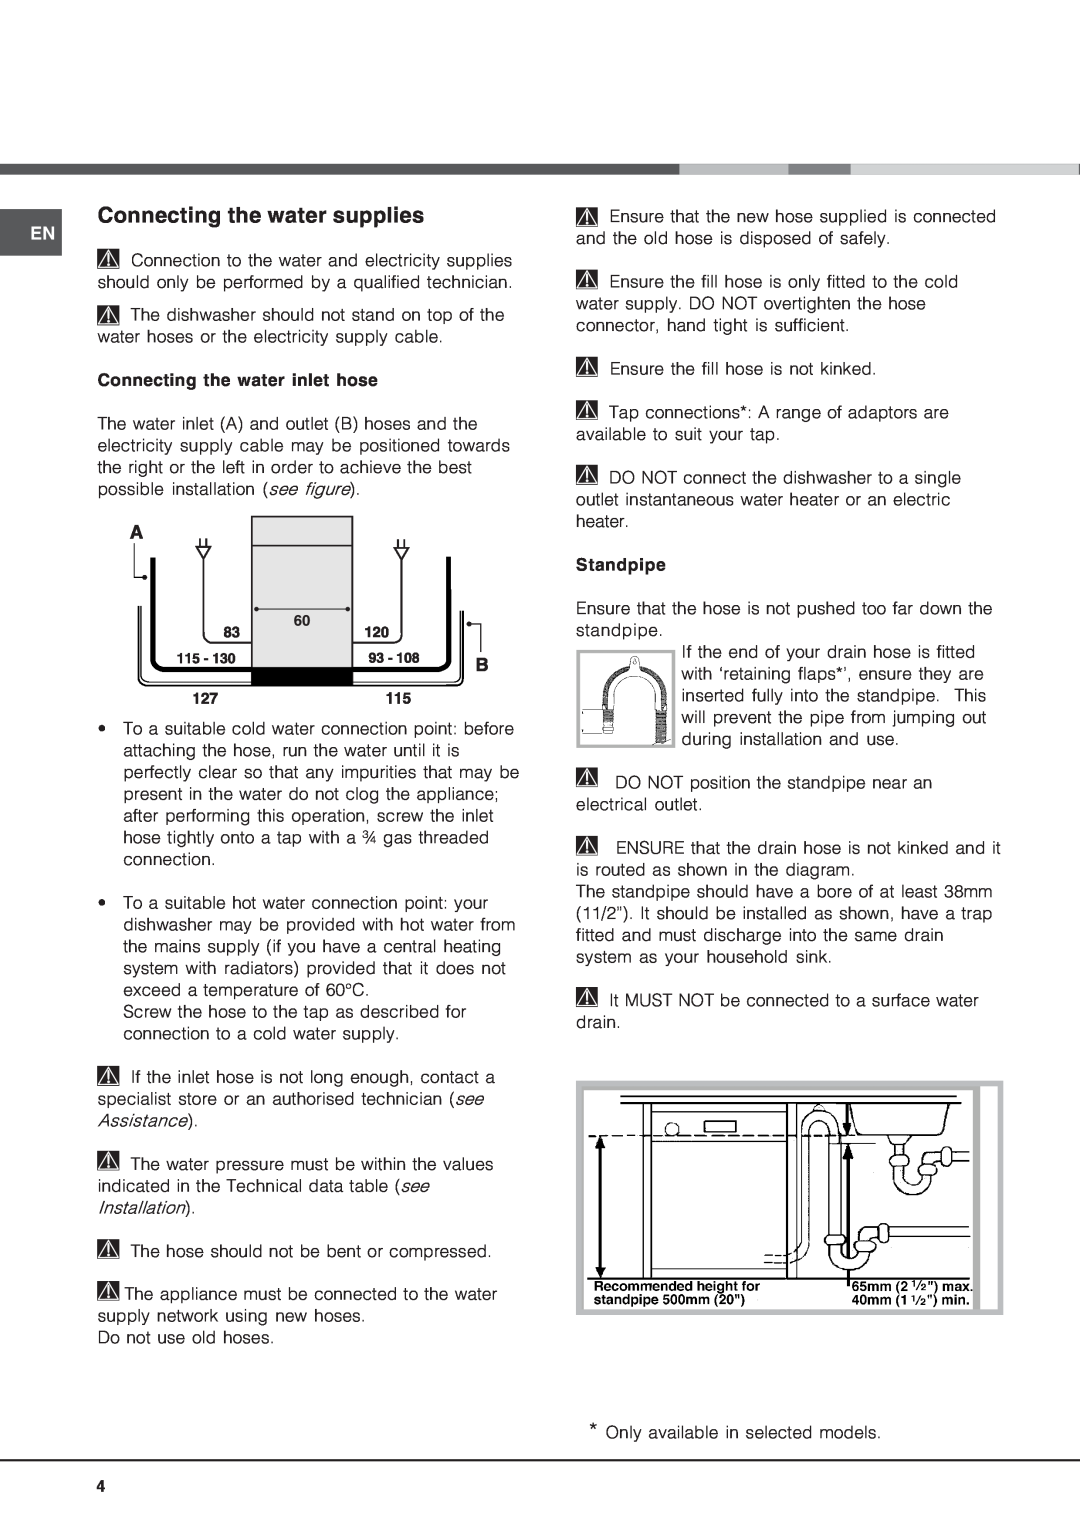 Hotpoint LFT04 manual Connecting the water supplies 